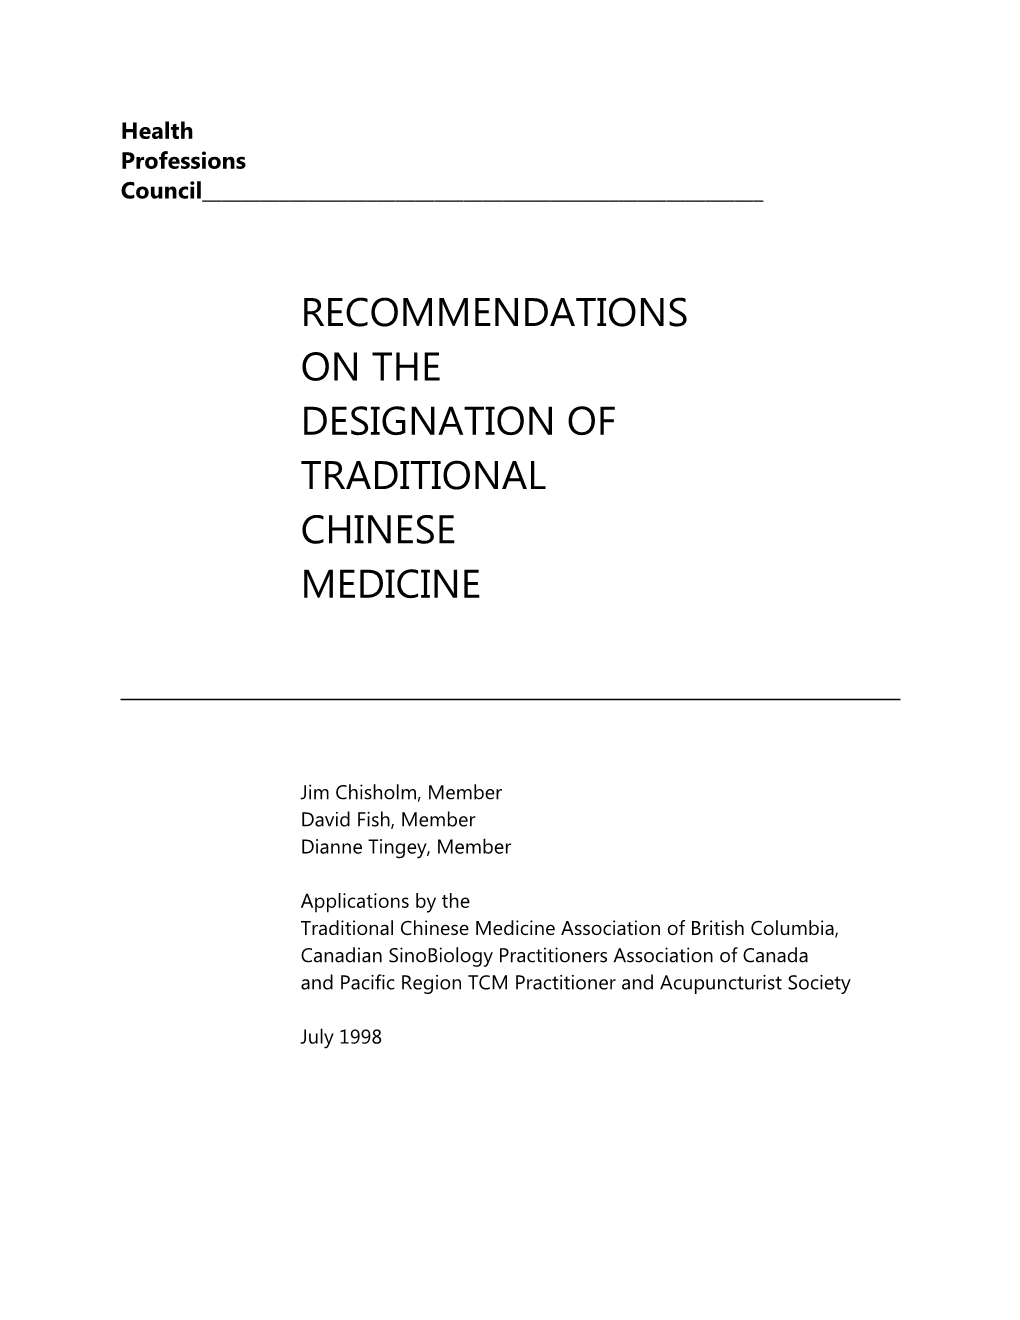 Recommendations on the Designation of Traditional Chinese Medicine